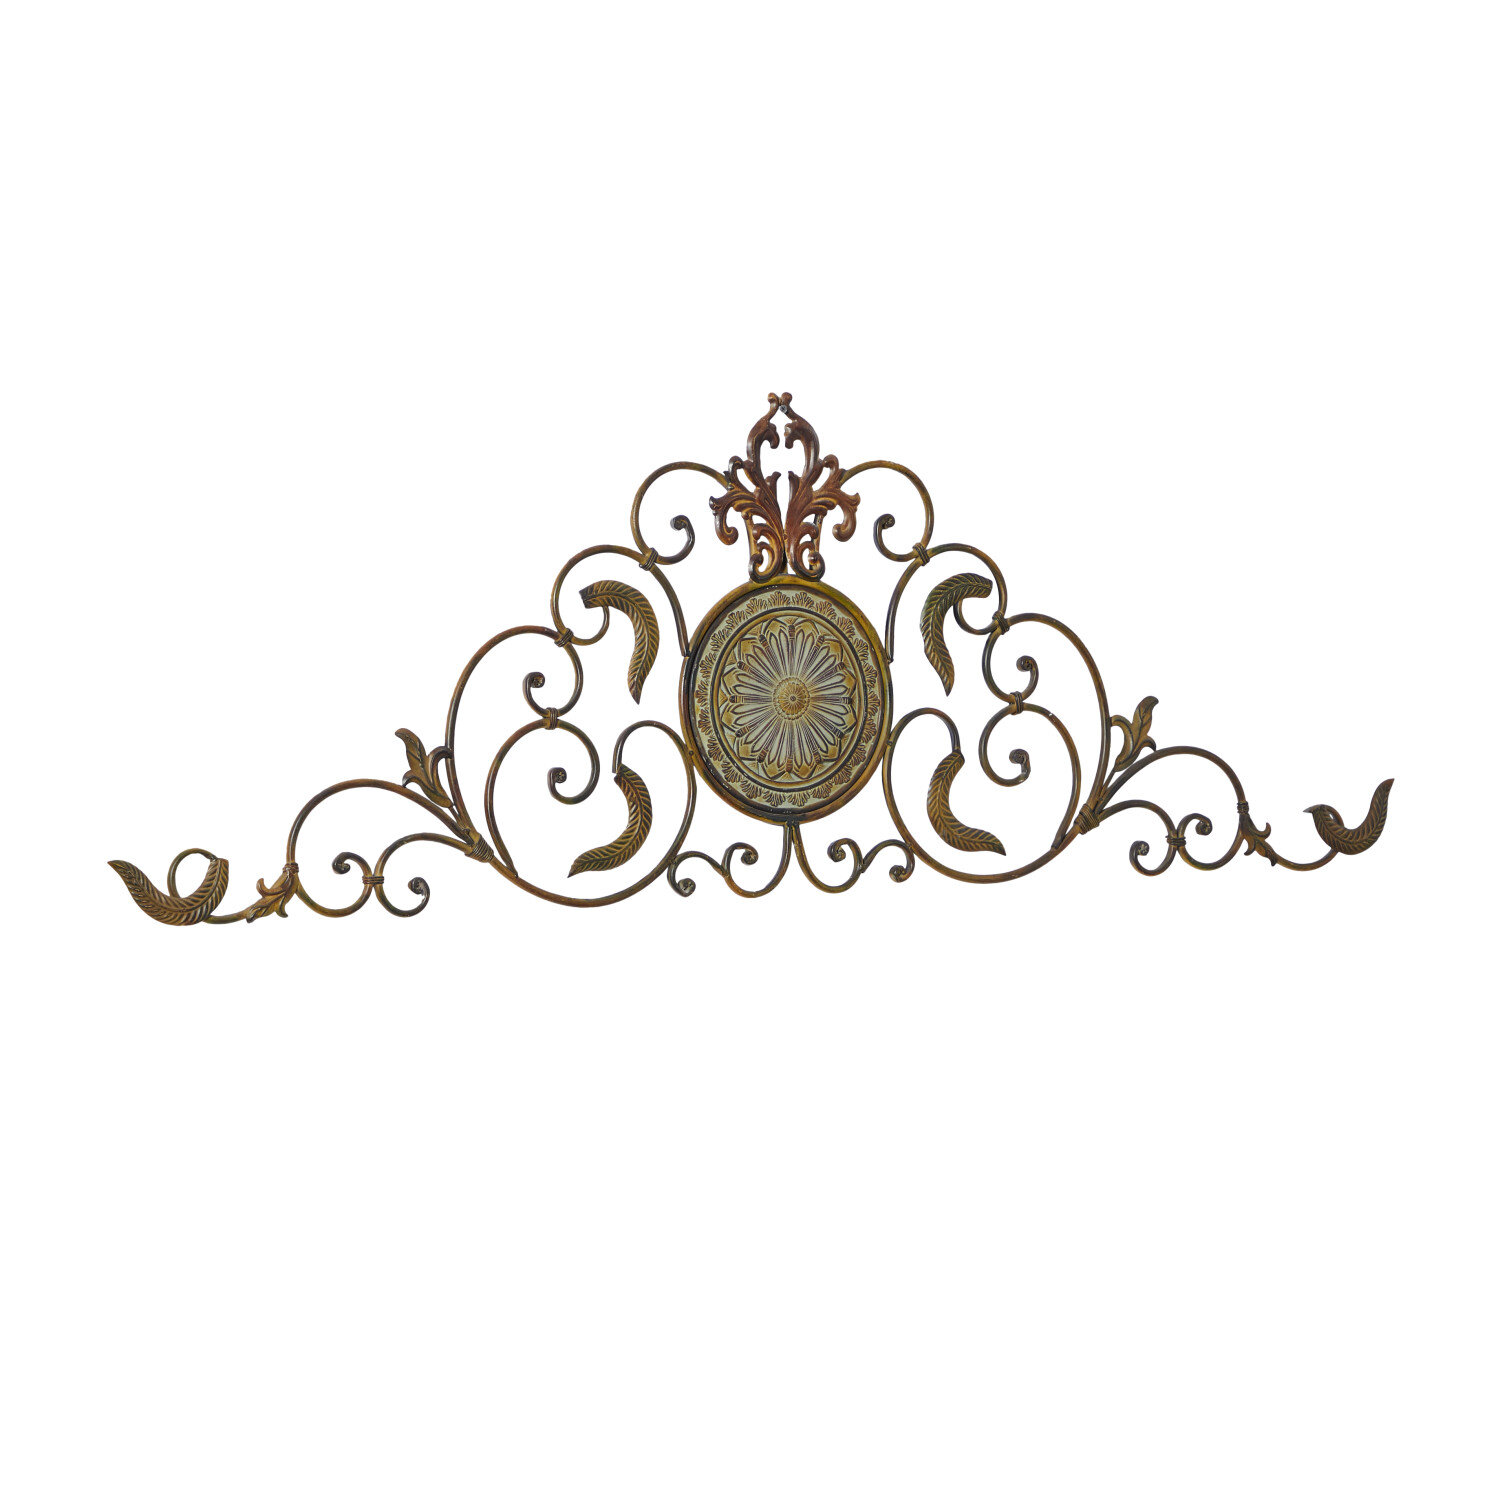 Dayanaprincess Home Accessory Decorative Gift Square Fleur-De-Lis Wall Plaque Scrollwork New Scroll Work Durable Luxury Decoration